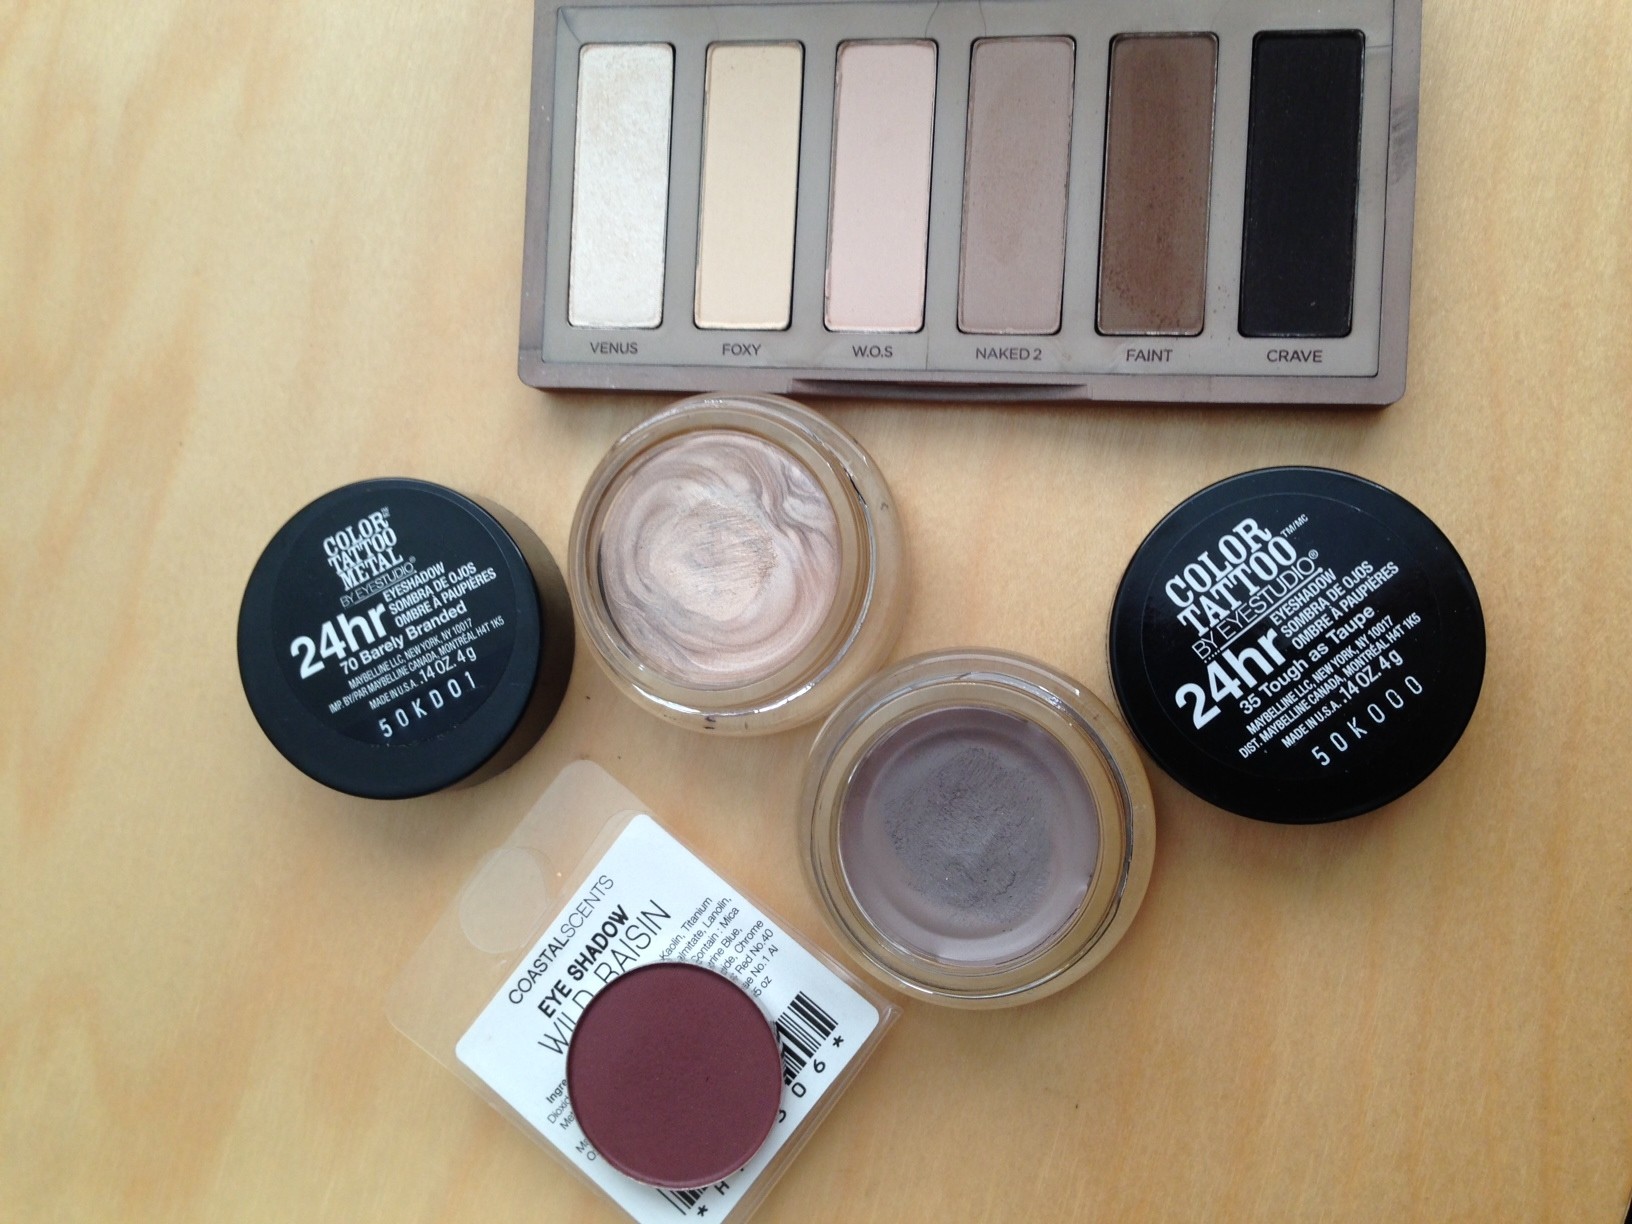 Double Trouble - Maybelline Color Tattoo Shadows in Barely Branded and  Tough as Taupe - The Lab Bunny